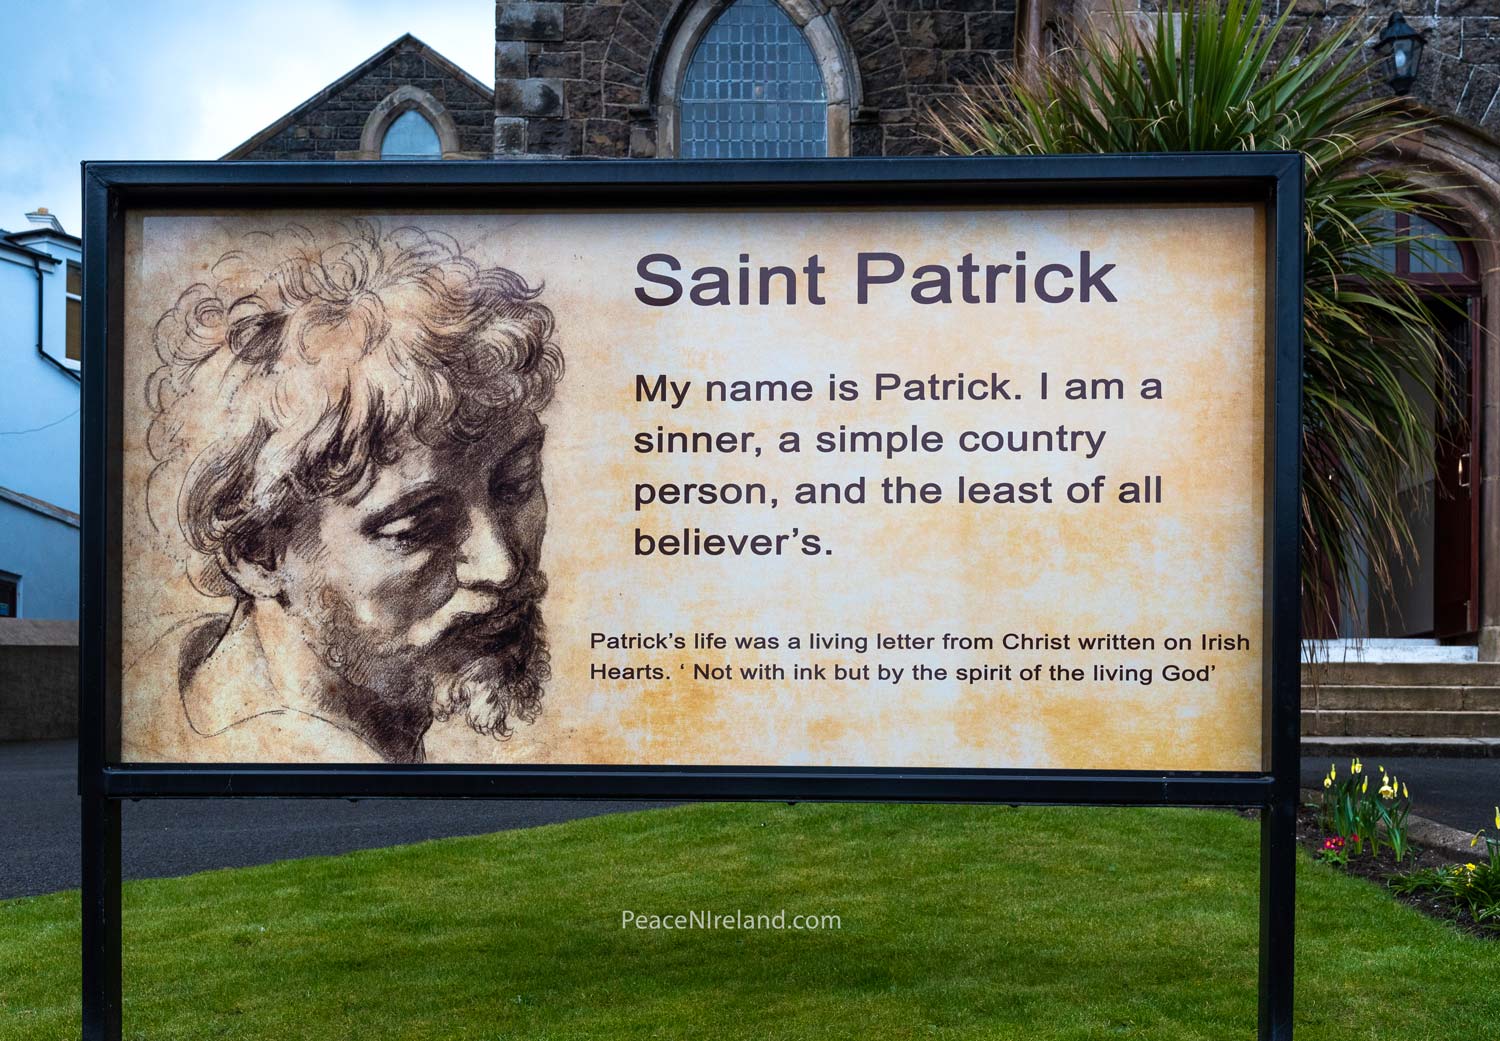 Portrush Presbyterian Church paid their own tribute to St Patrick (before COVID lockdown) with this poster outside the church